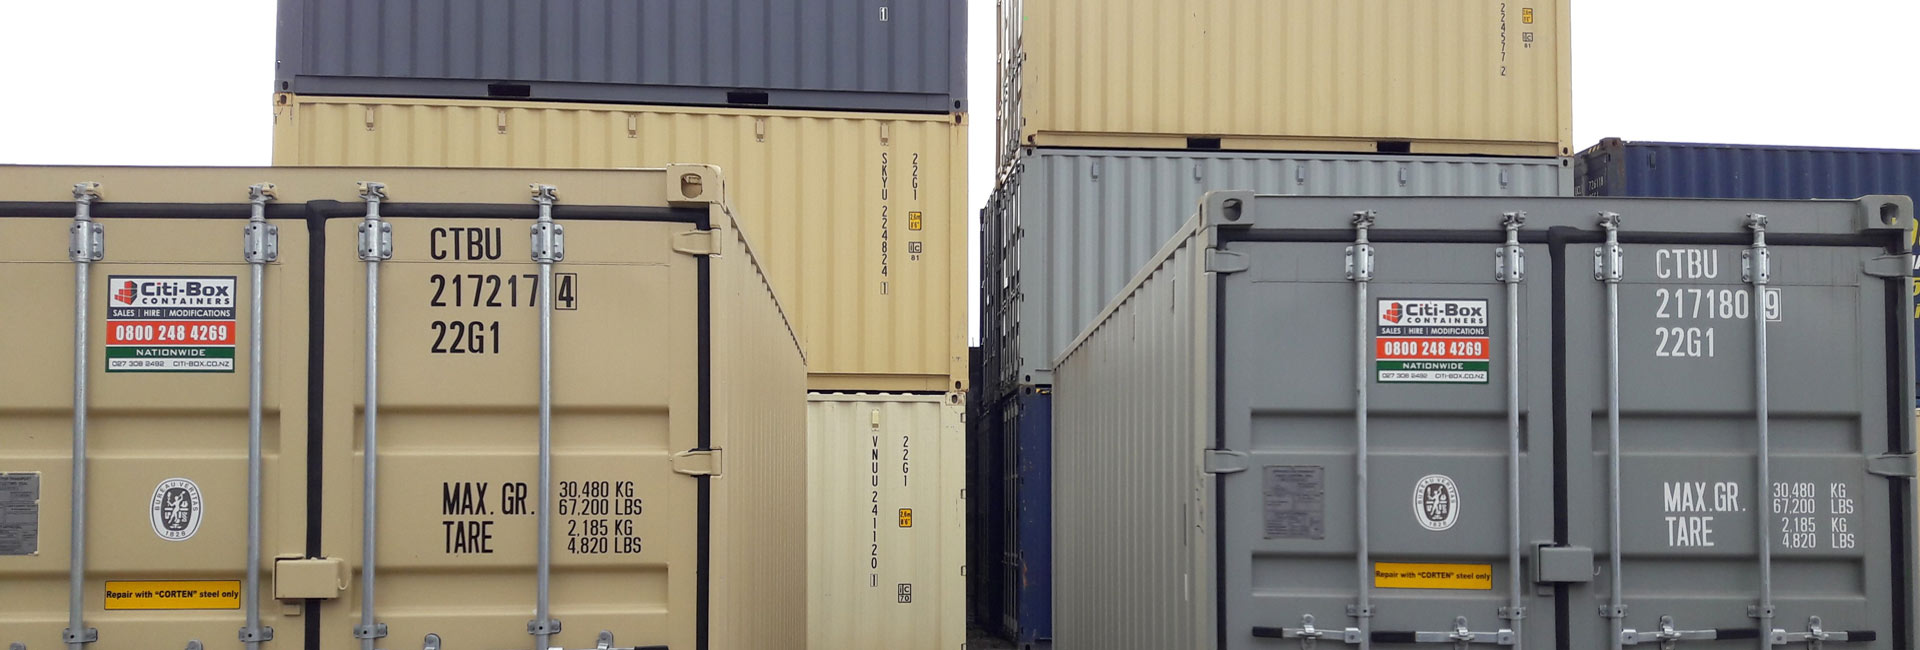 Containers for sale or hire Palmerston North, Whanganui or Taupo